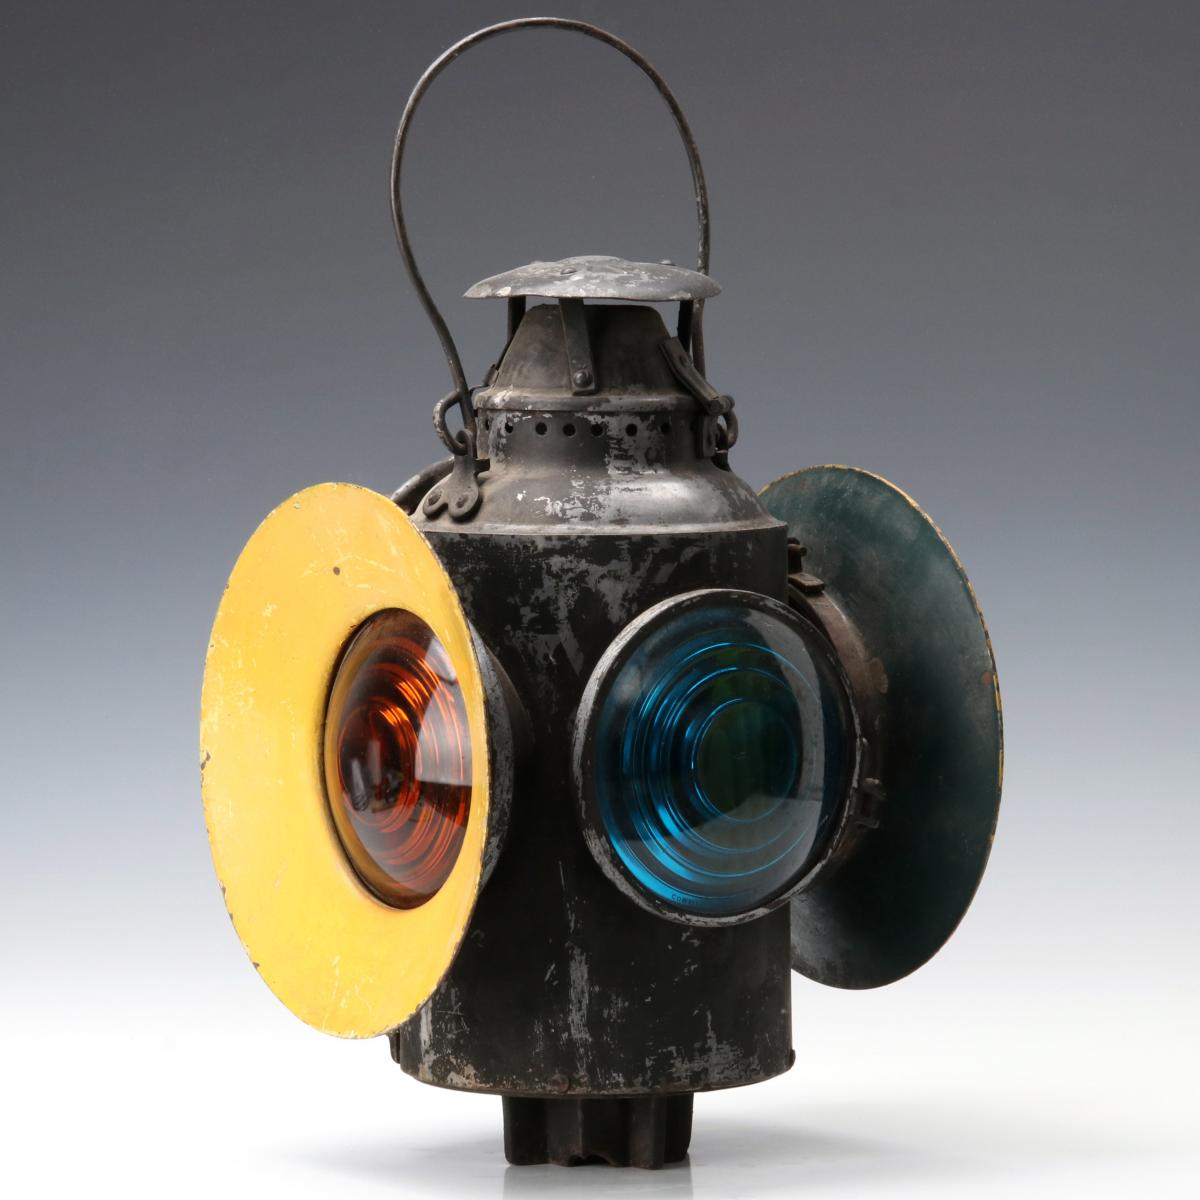 A CANADIAN PACIFIC RAILROAD SWITCH LAMP